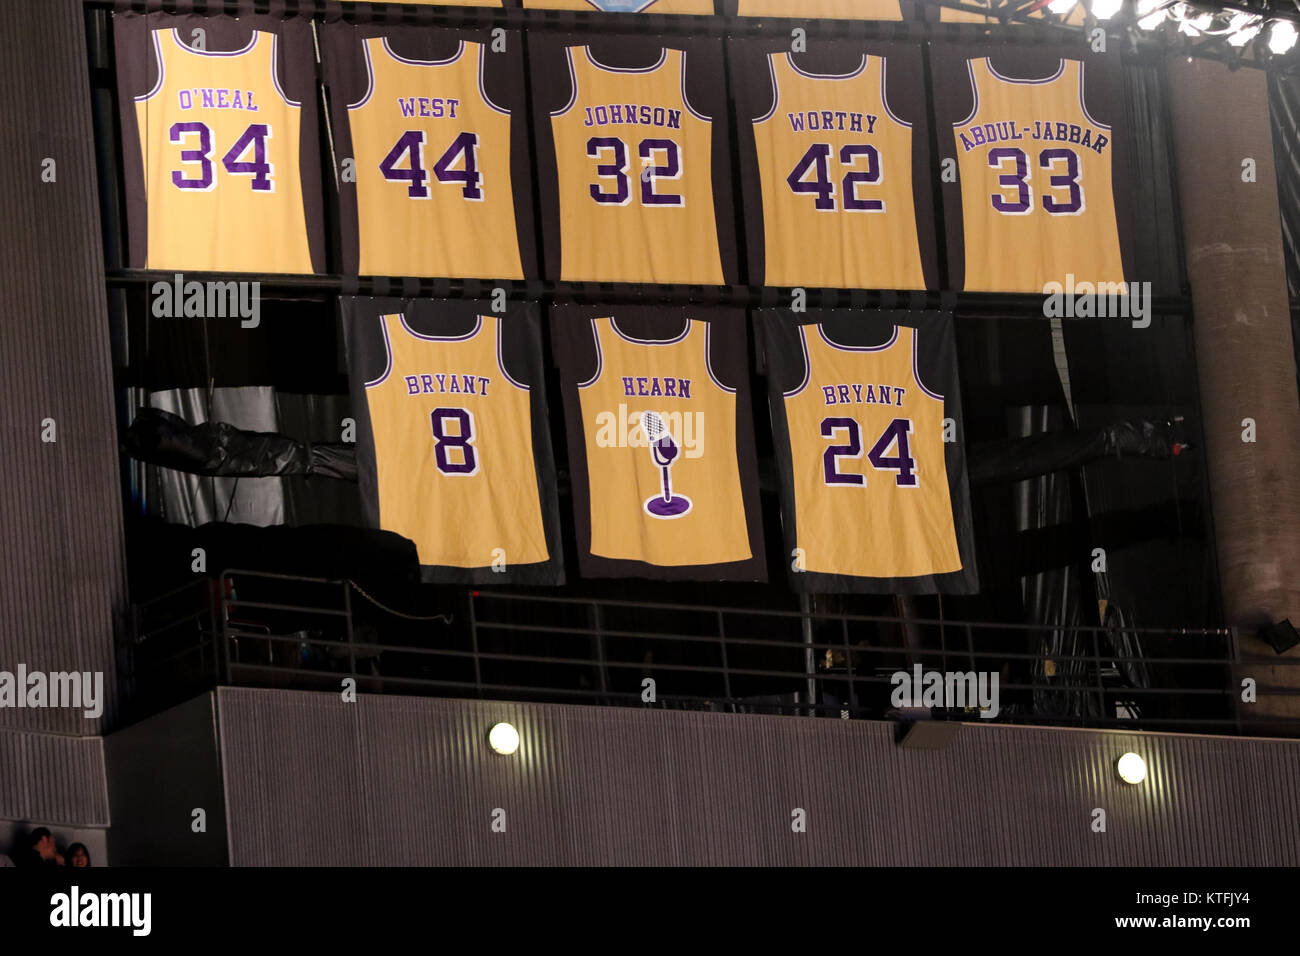 lakers 23 jersey retired